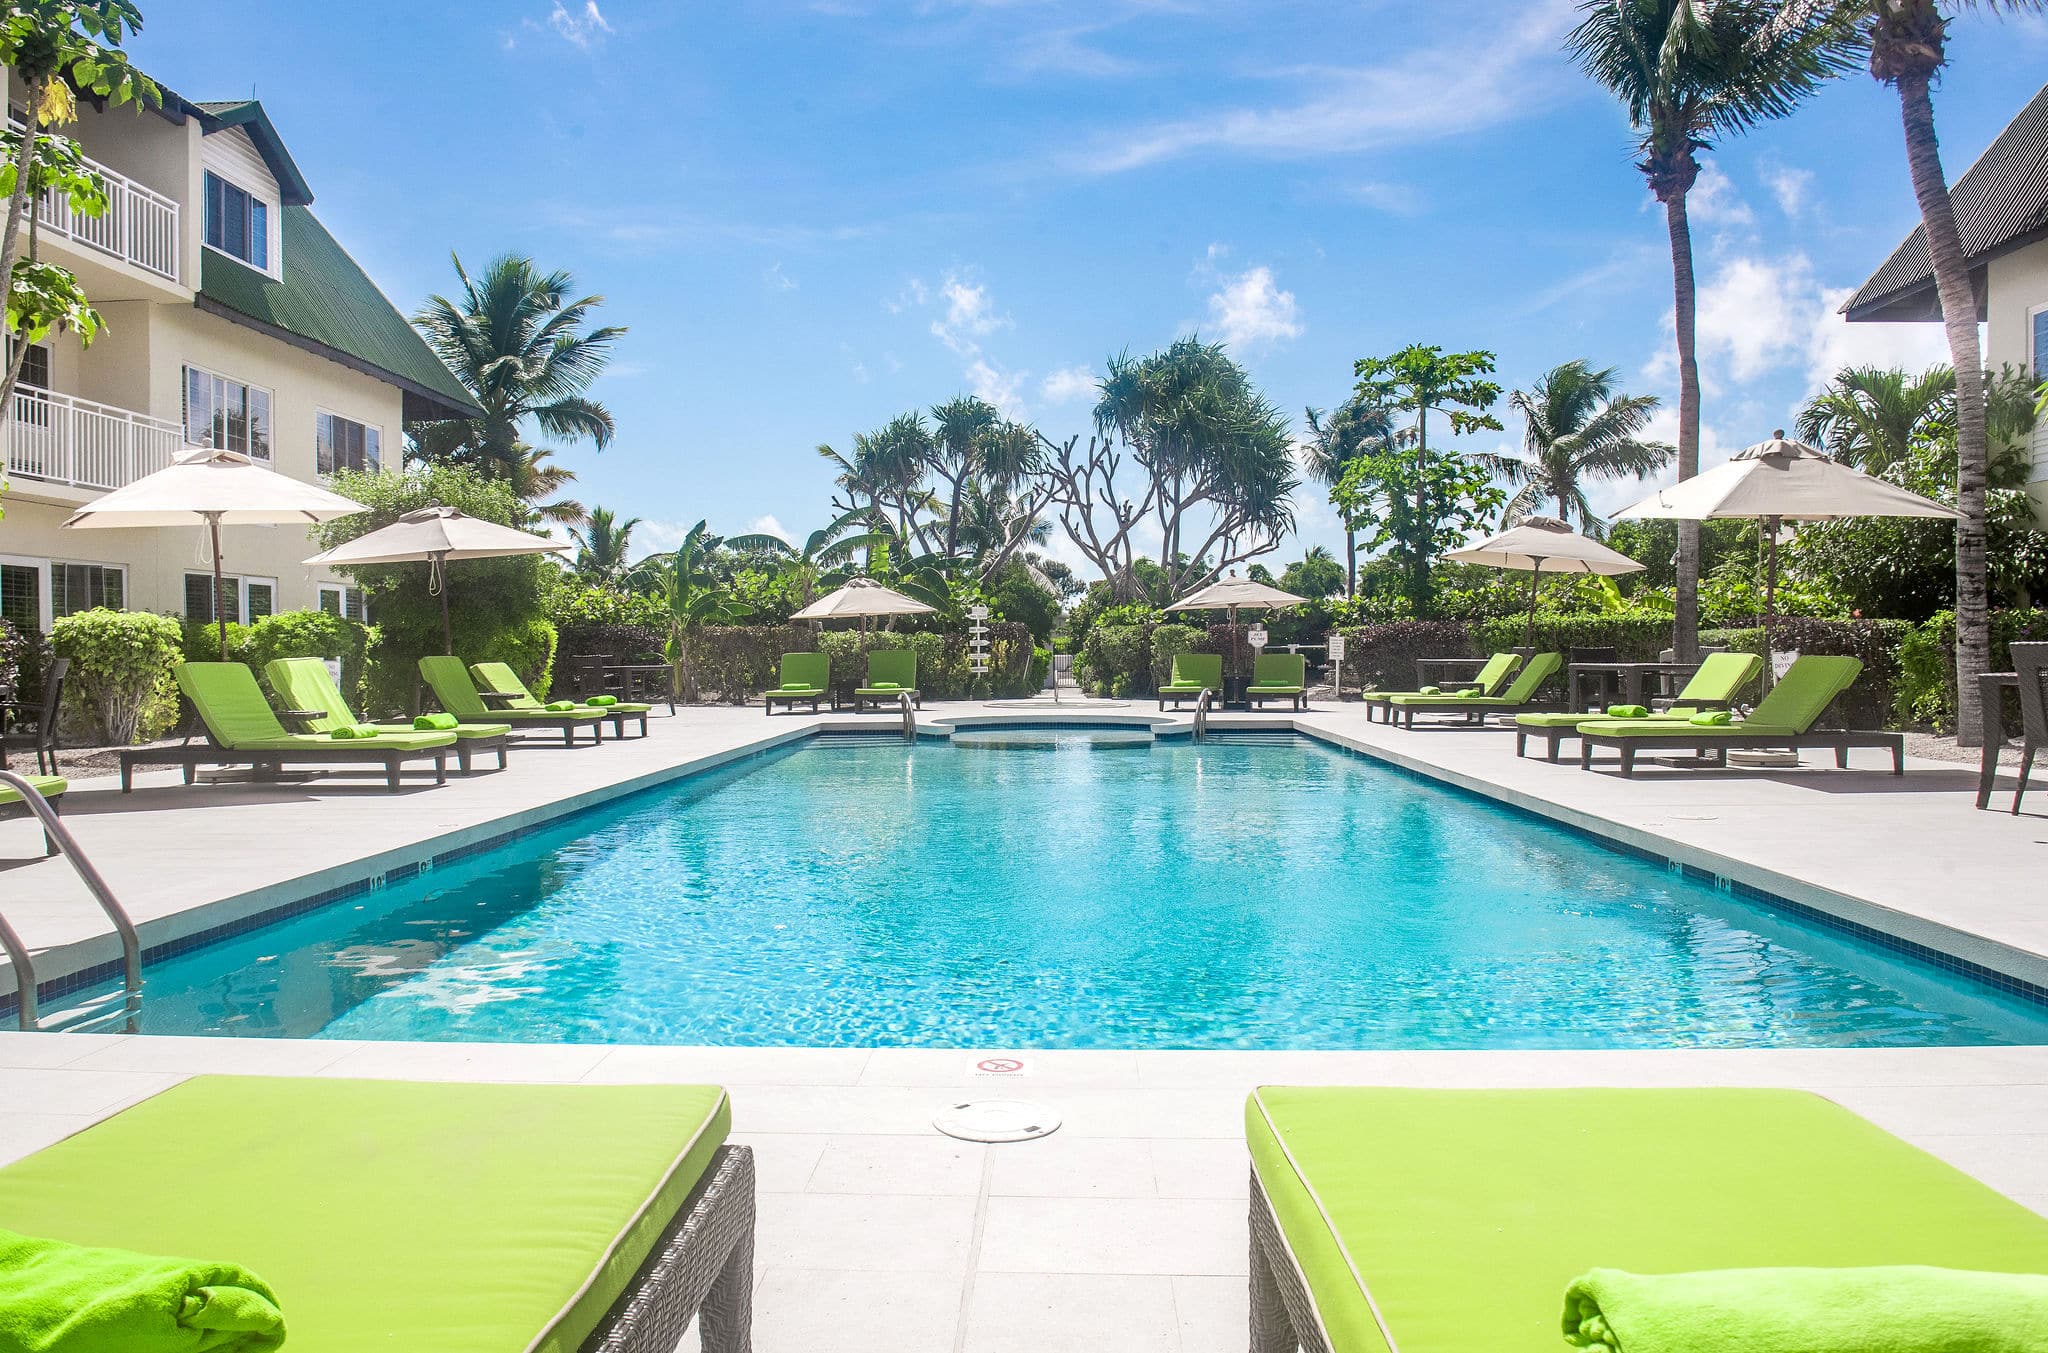 Rectangular pool with apple green chaise lounges overlooking pool deck and palm trees